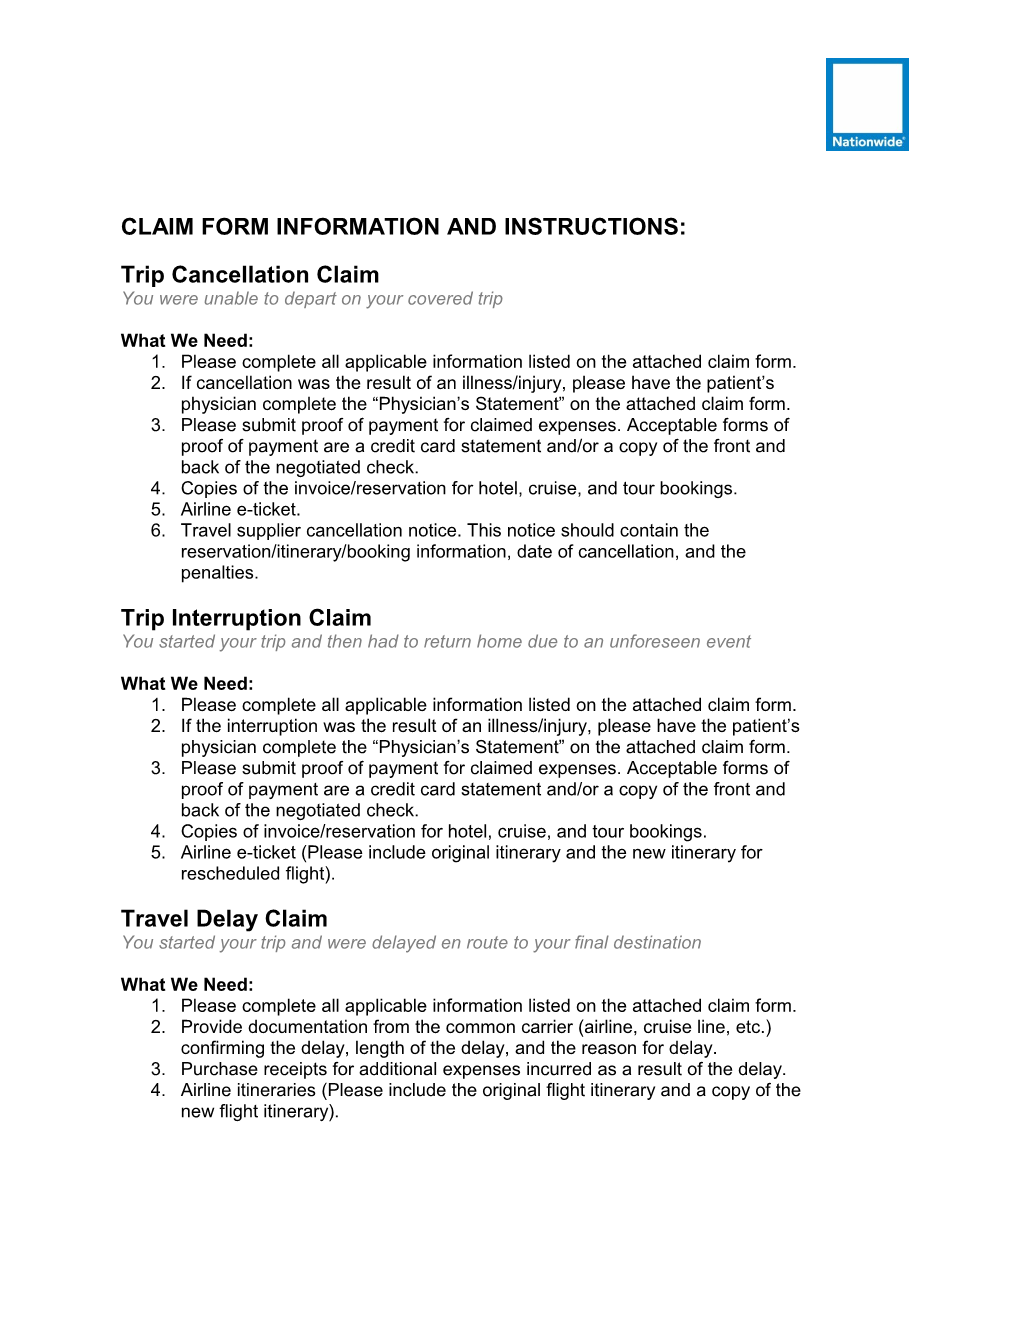 Claim Form Information and Instructions